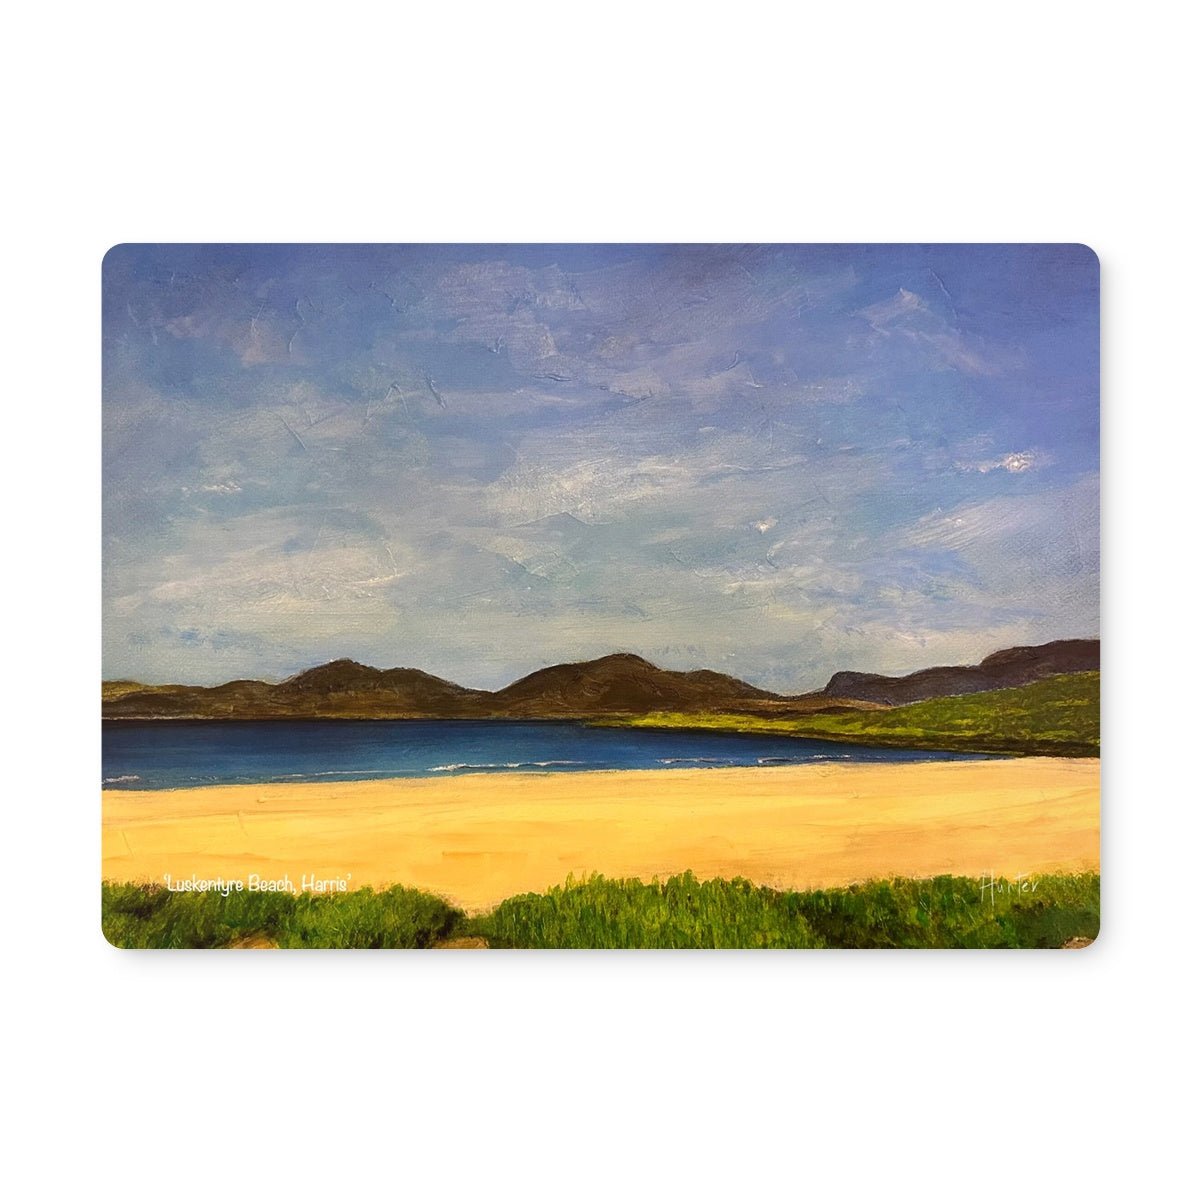 Luskentyre Beach Harris Art Gifts Placemat-Placemats-Hebridean Islands Art Gallery-Single Placemat-Paintings, Prints, Homeware, Art Gifts From Scotland By Scottish Artist Kevin Hunter